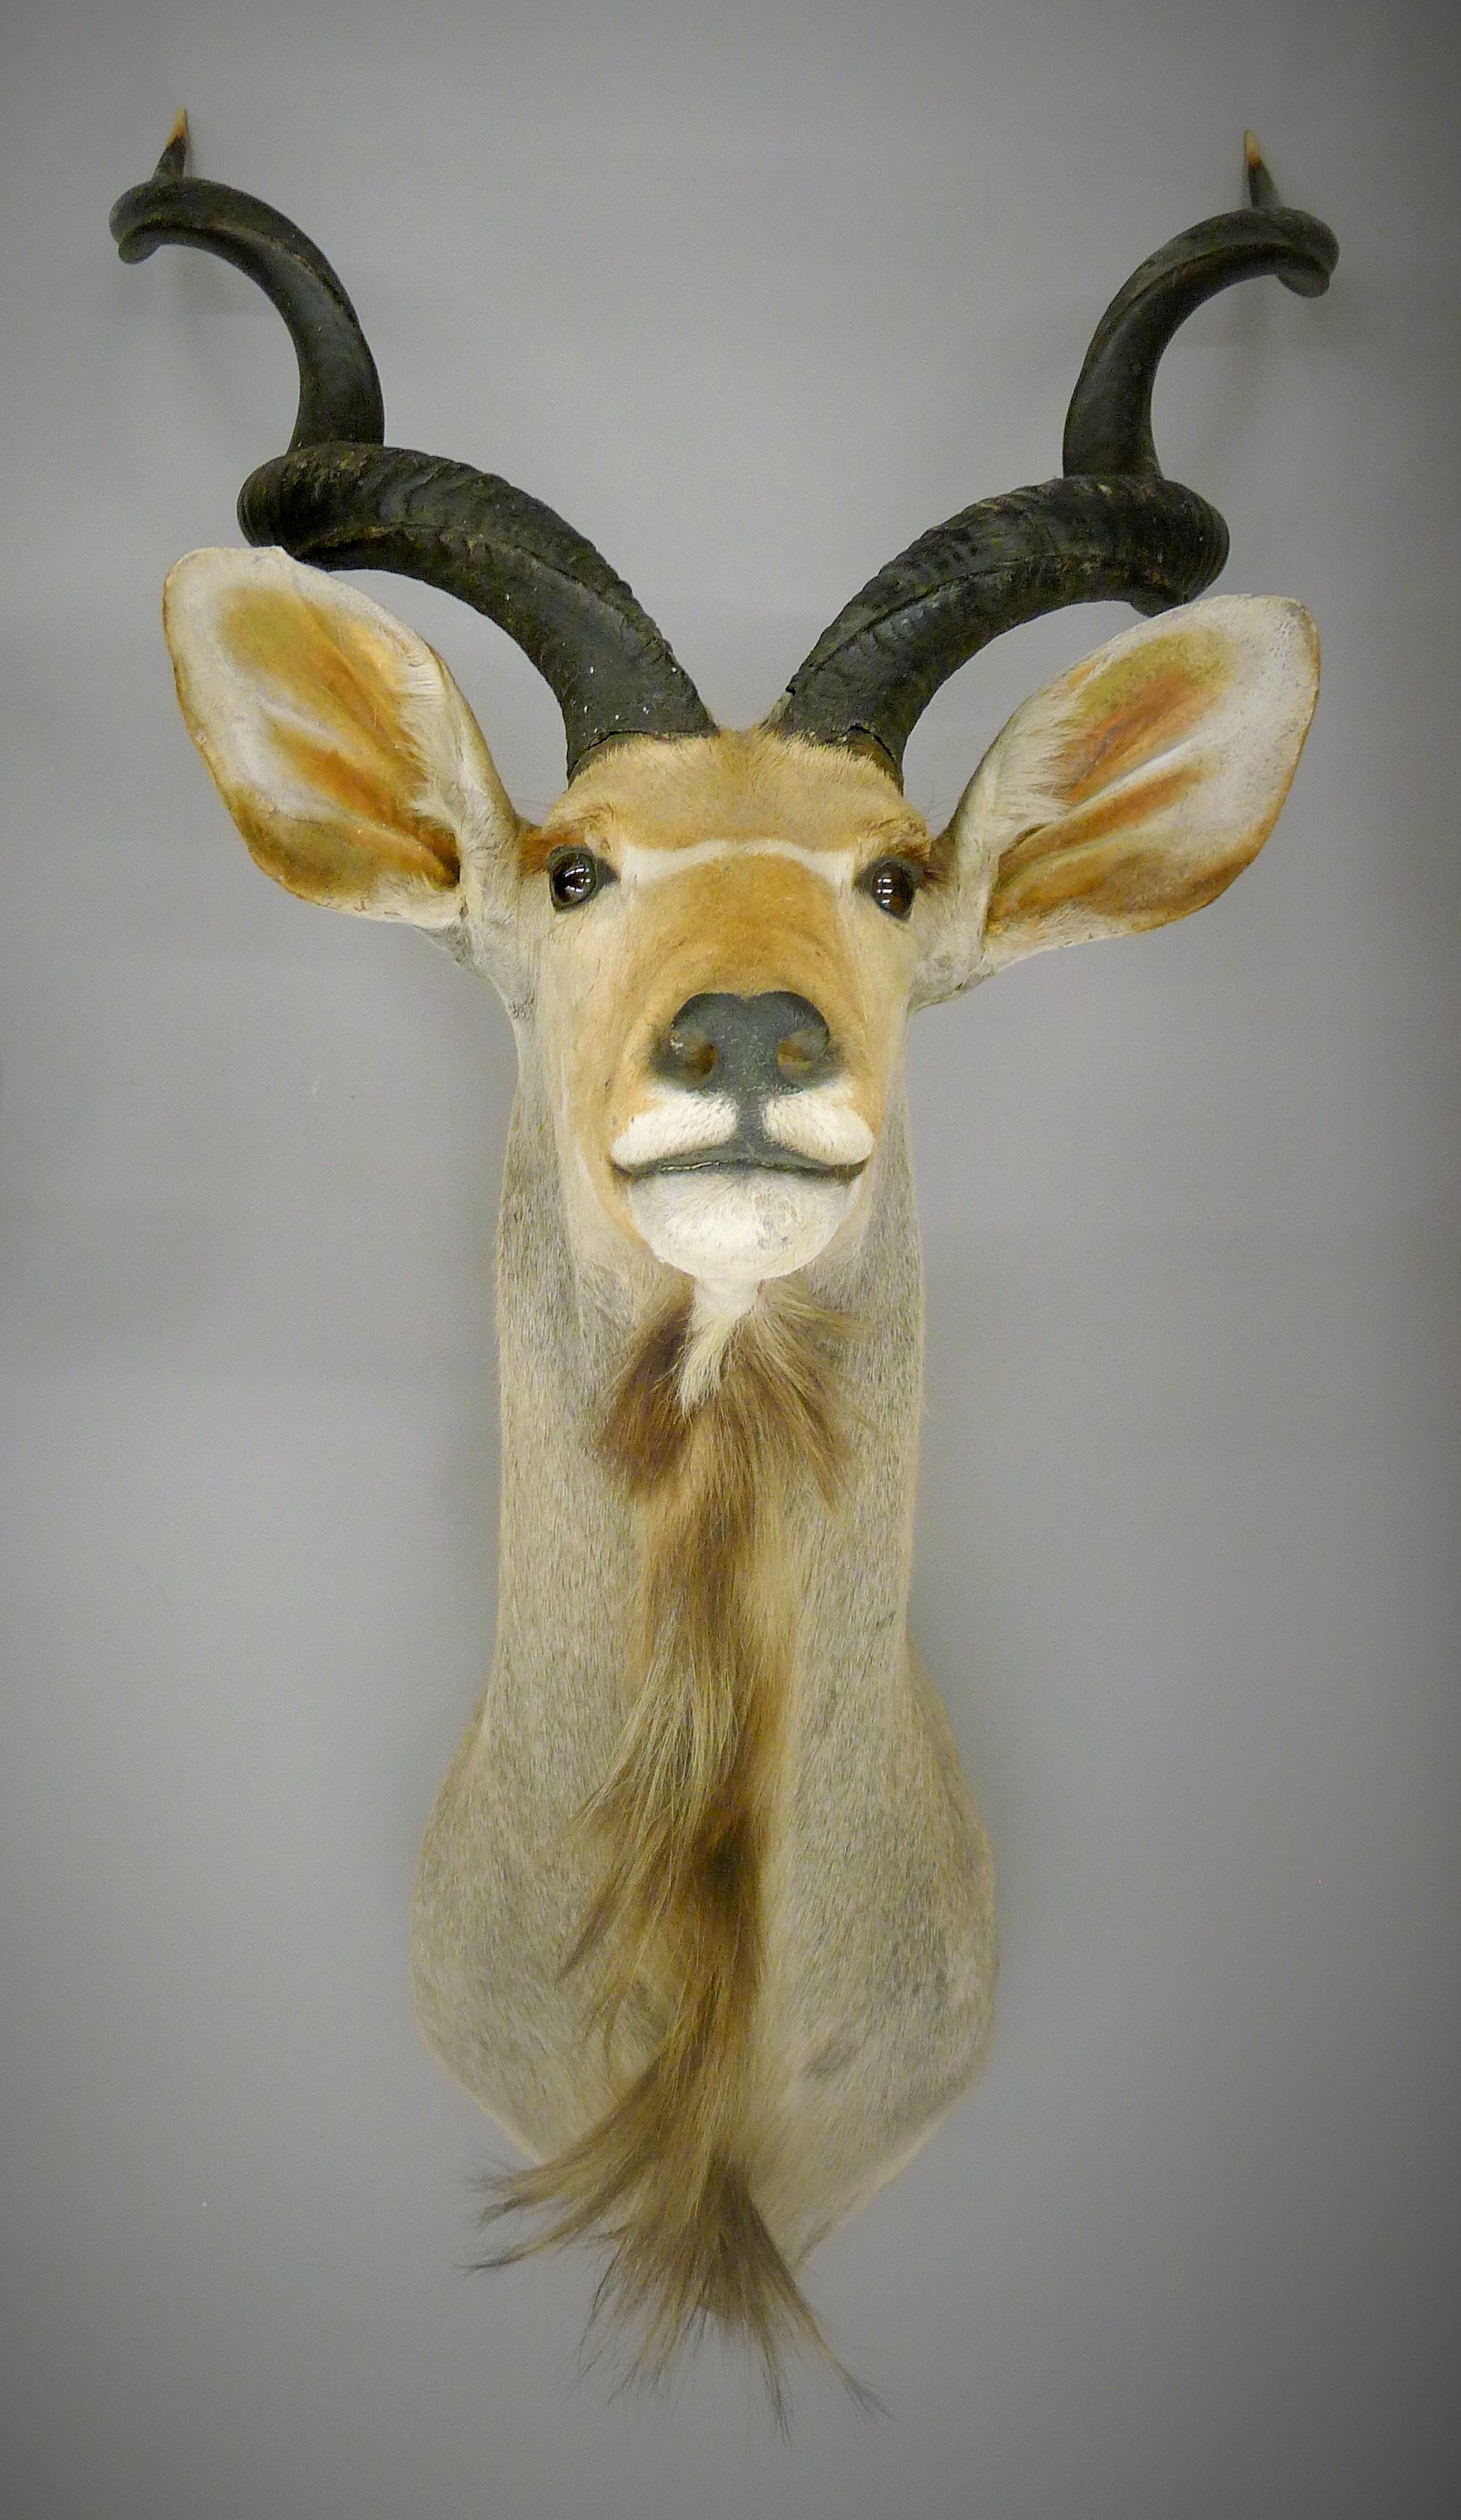 A taxidermy specimen of a Kudu head and horns Tragelaphus imberbis. - Image 3 of 3